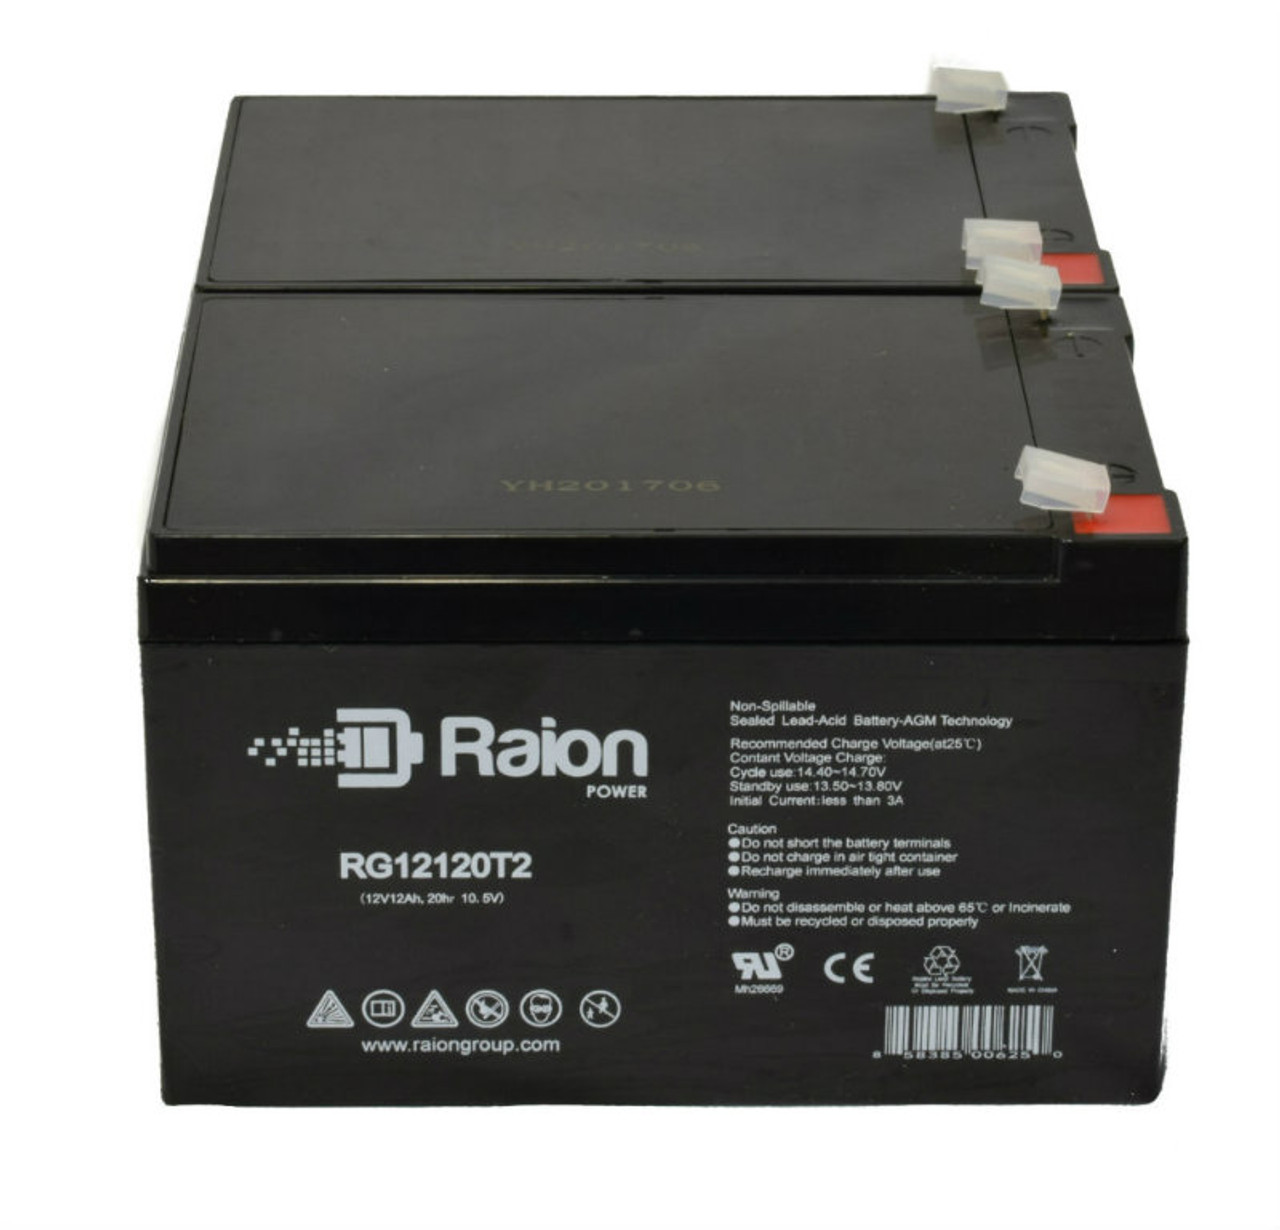 Raion Power 12V 12Ah Non-Spillable Compatible Replacement Battery for Motoma MS12V14 - (2 Pack)